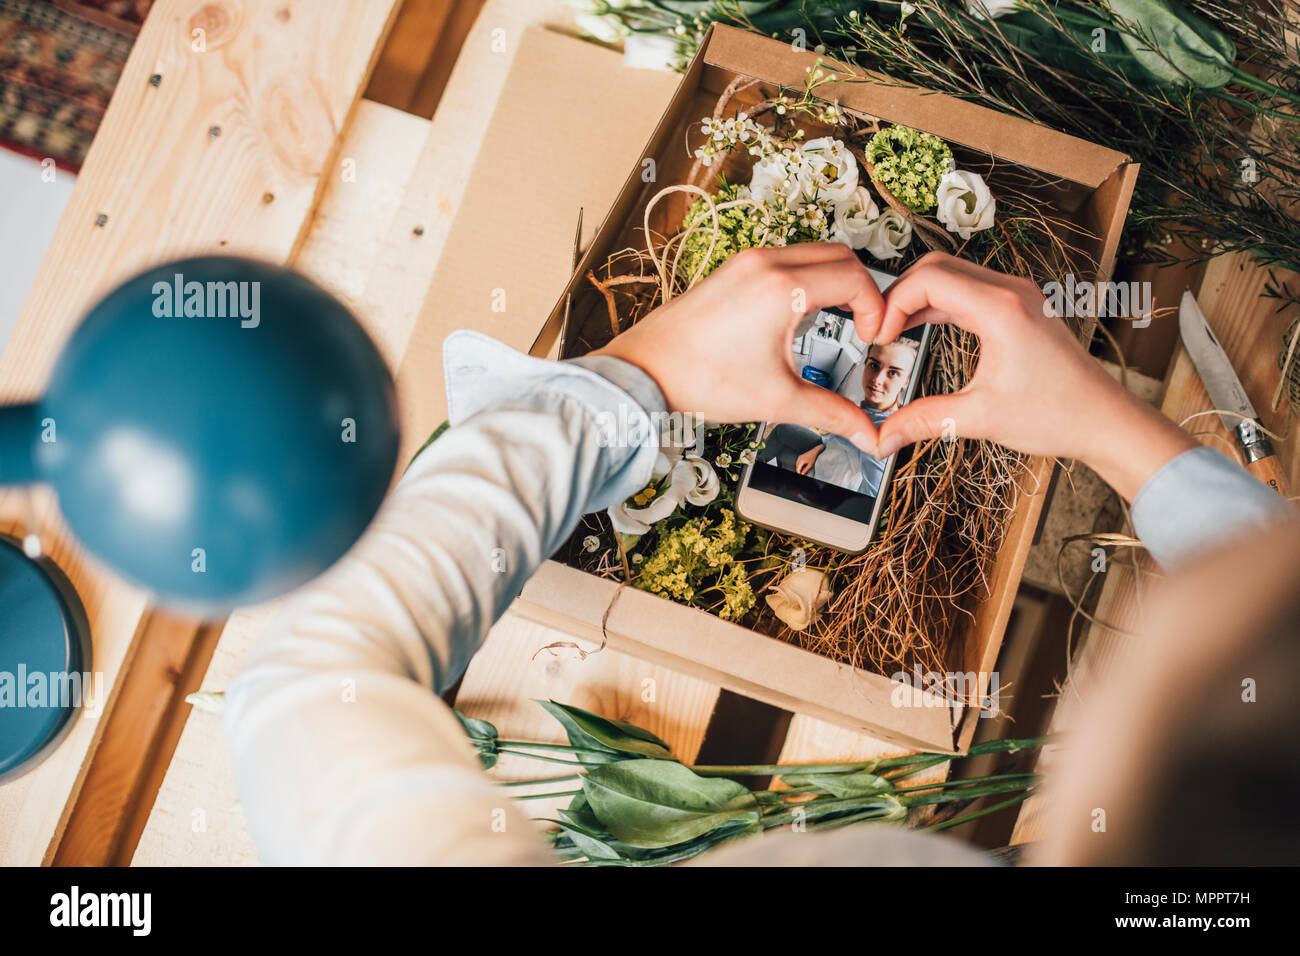 Woman arranging present in a box, partial view Stock Photo